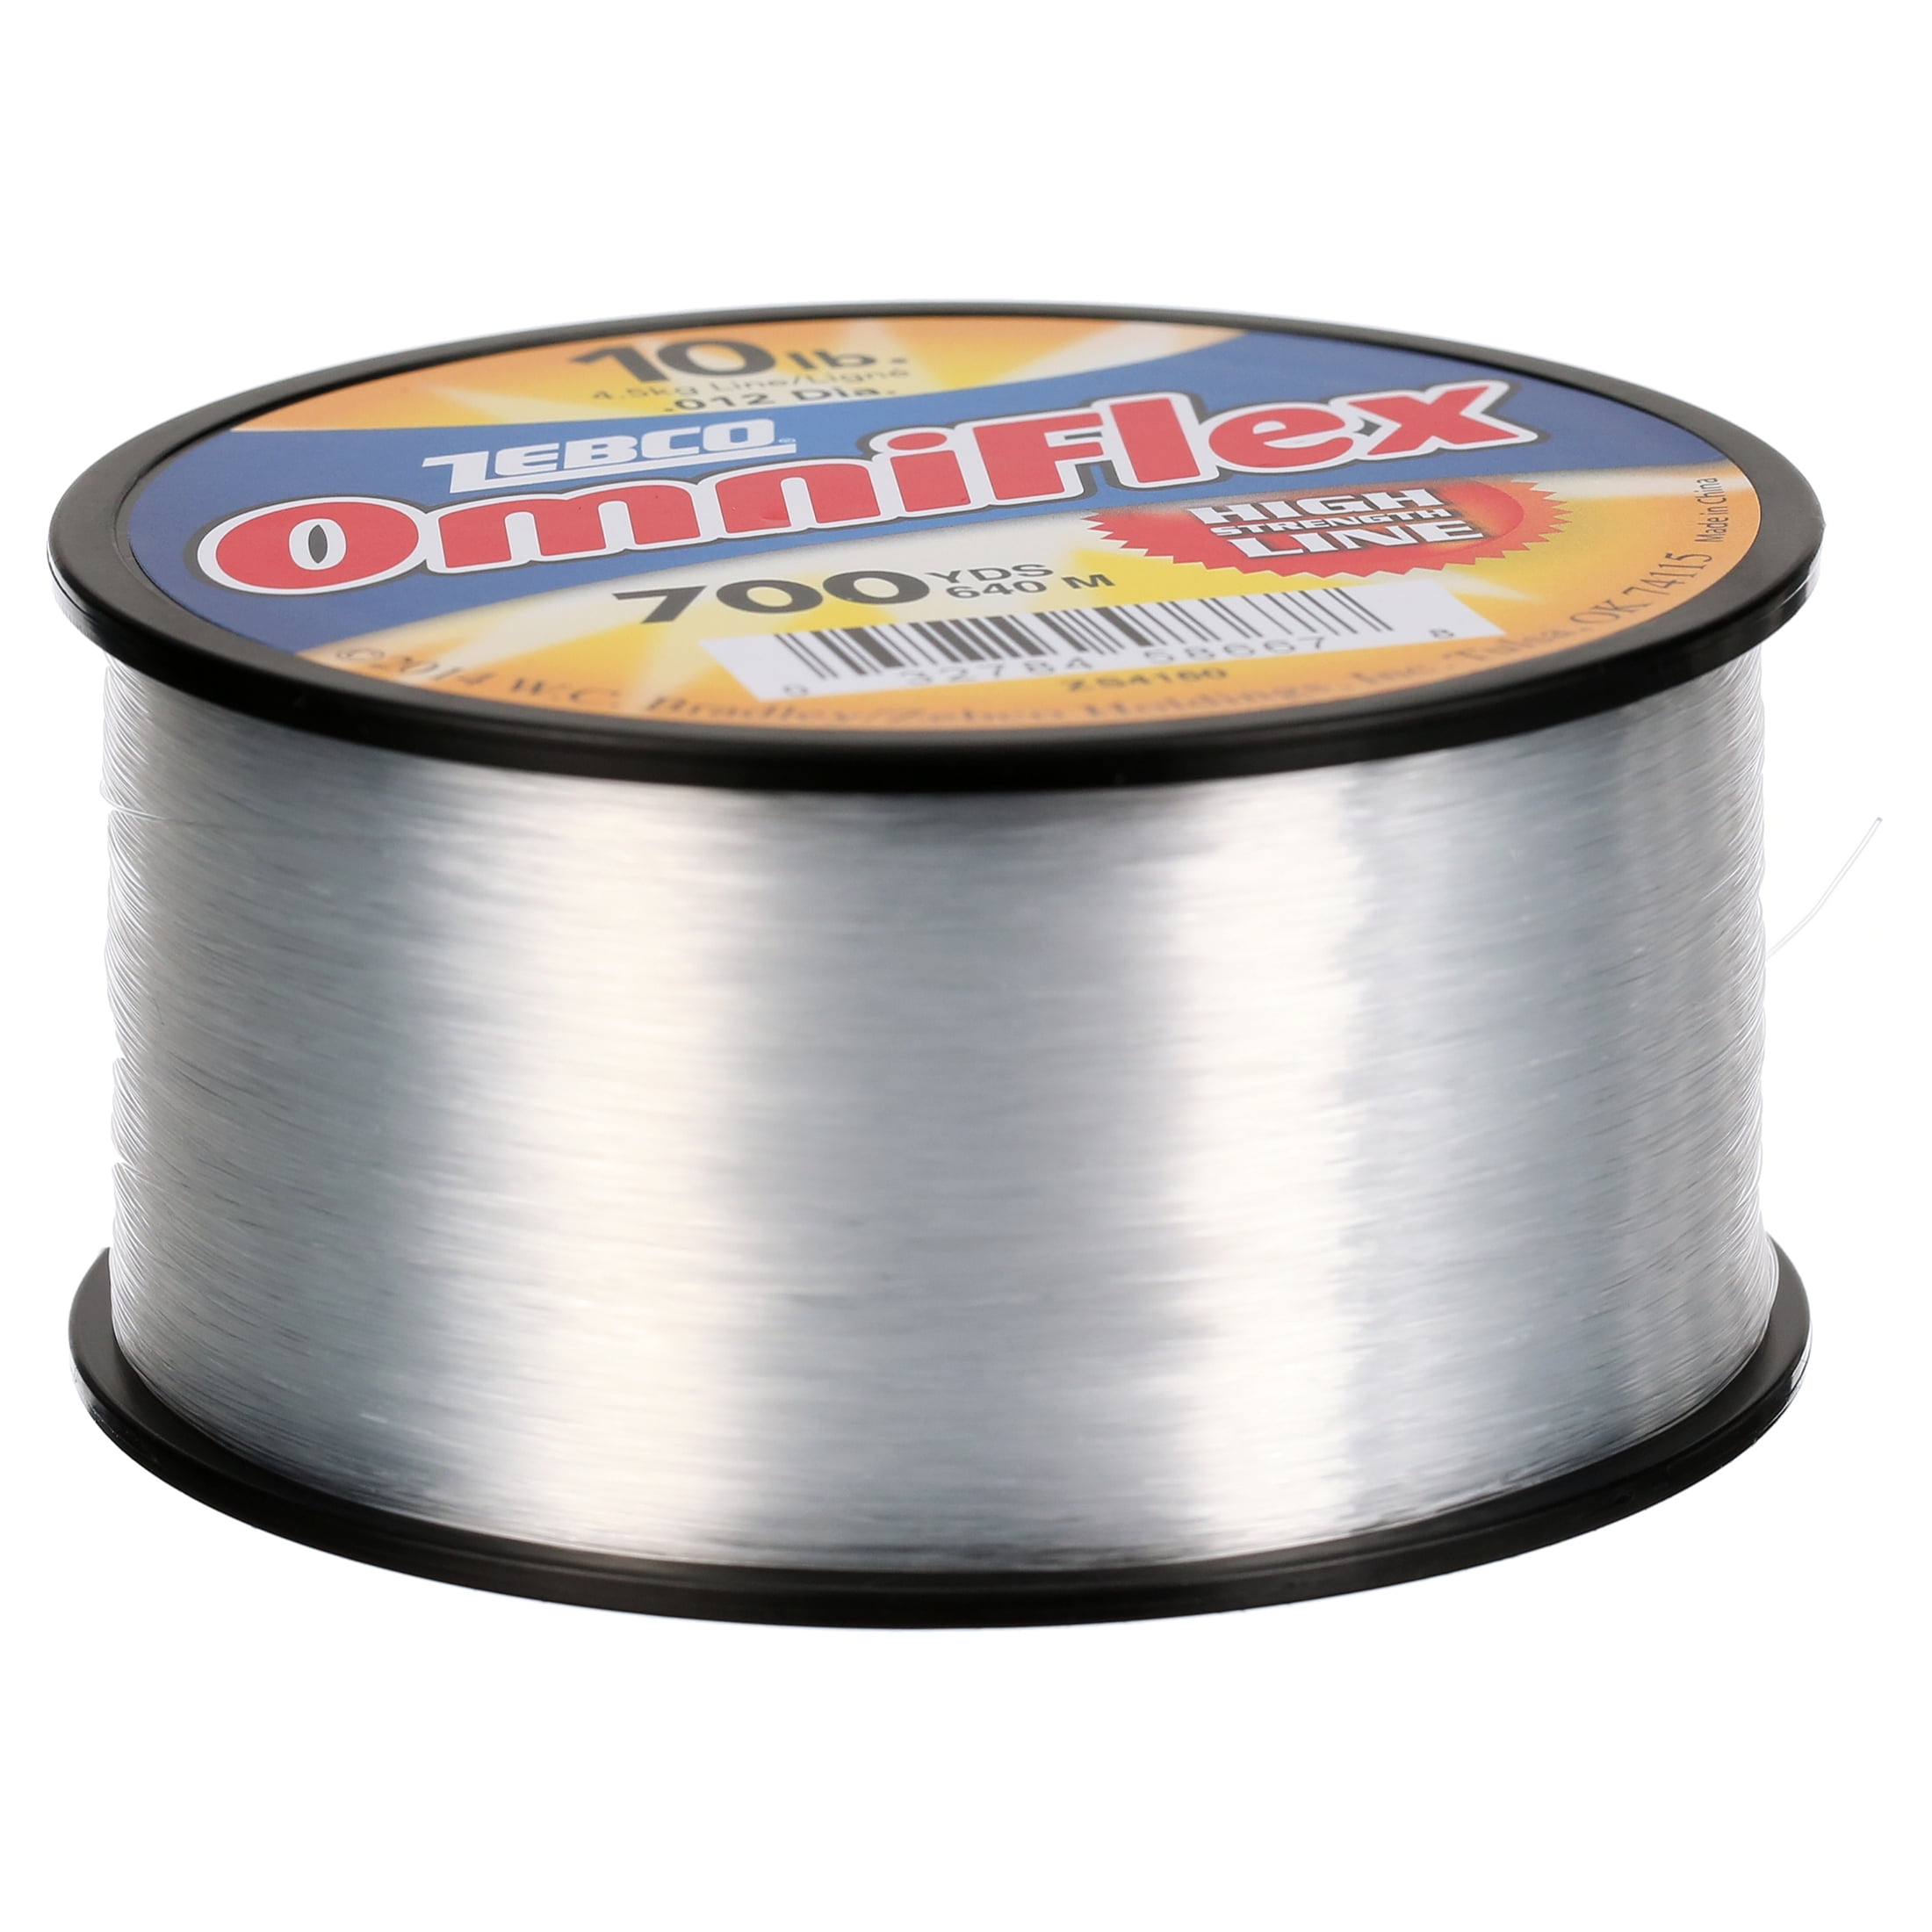 Buy Zebco Omniflex Monofilament Fishing Line, 10-Pound Tested